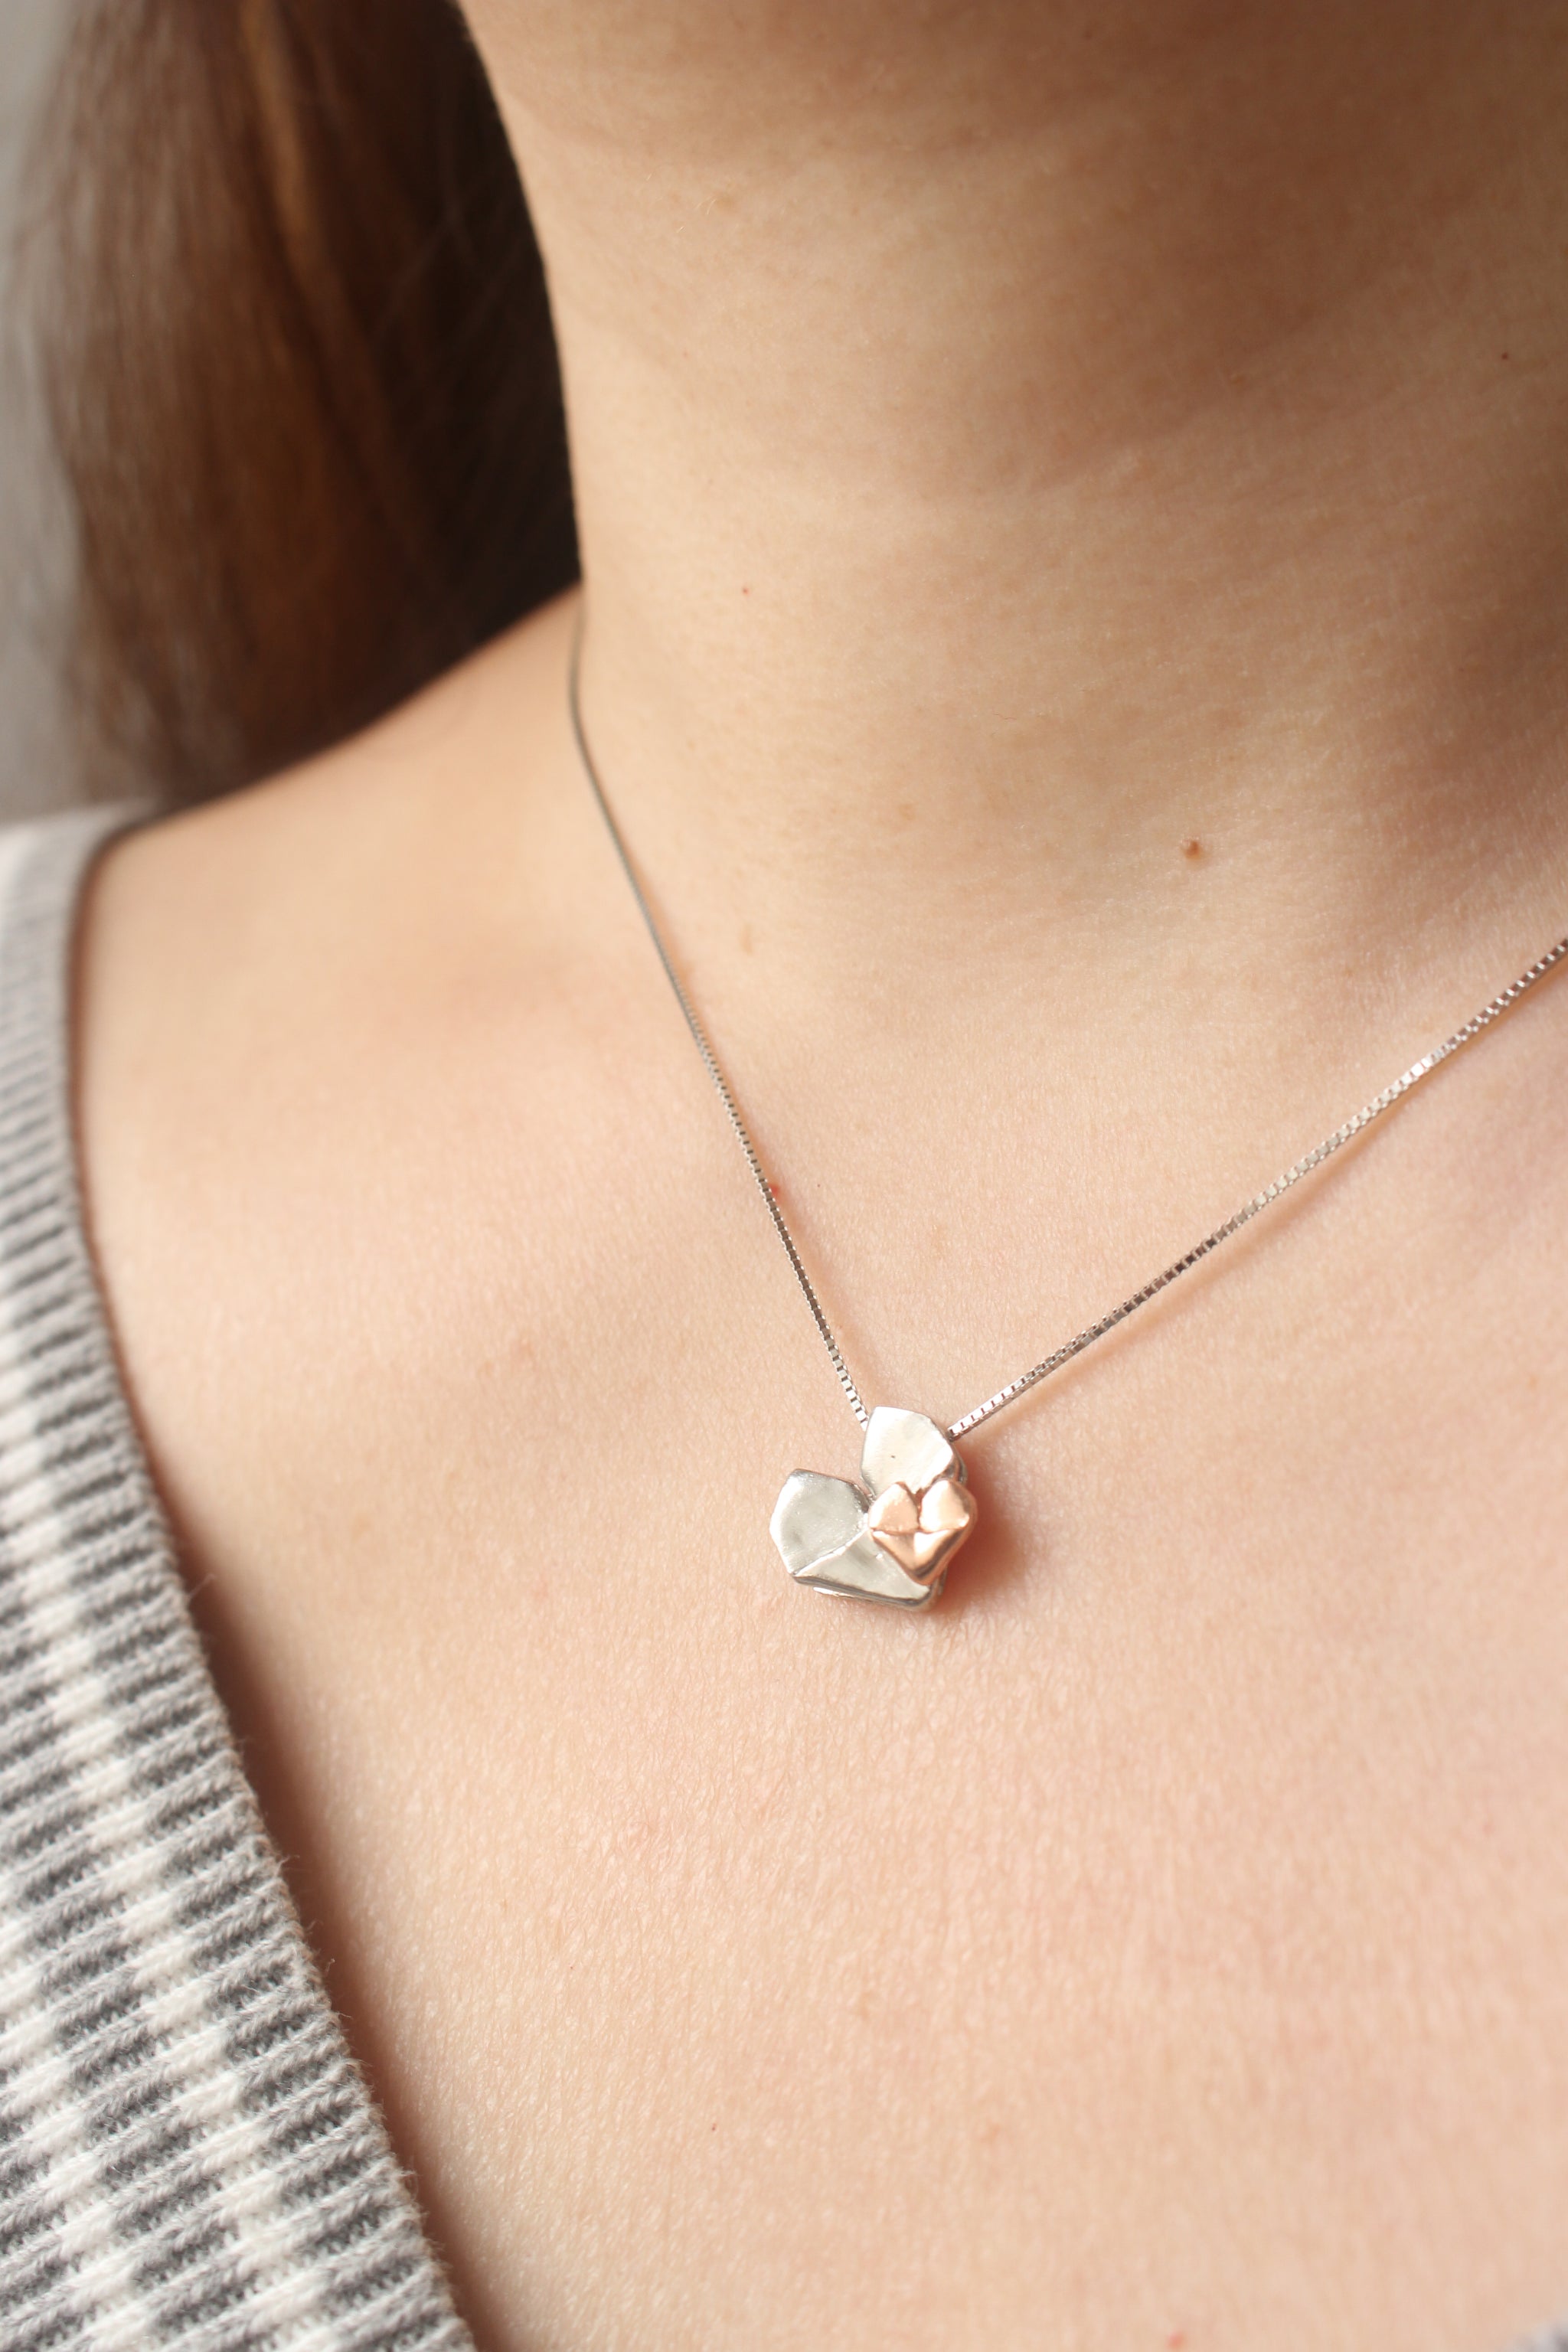 Dual Color Silver Origami Heart Necklace - Mother's Love (Silver and Rose Gold)